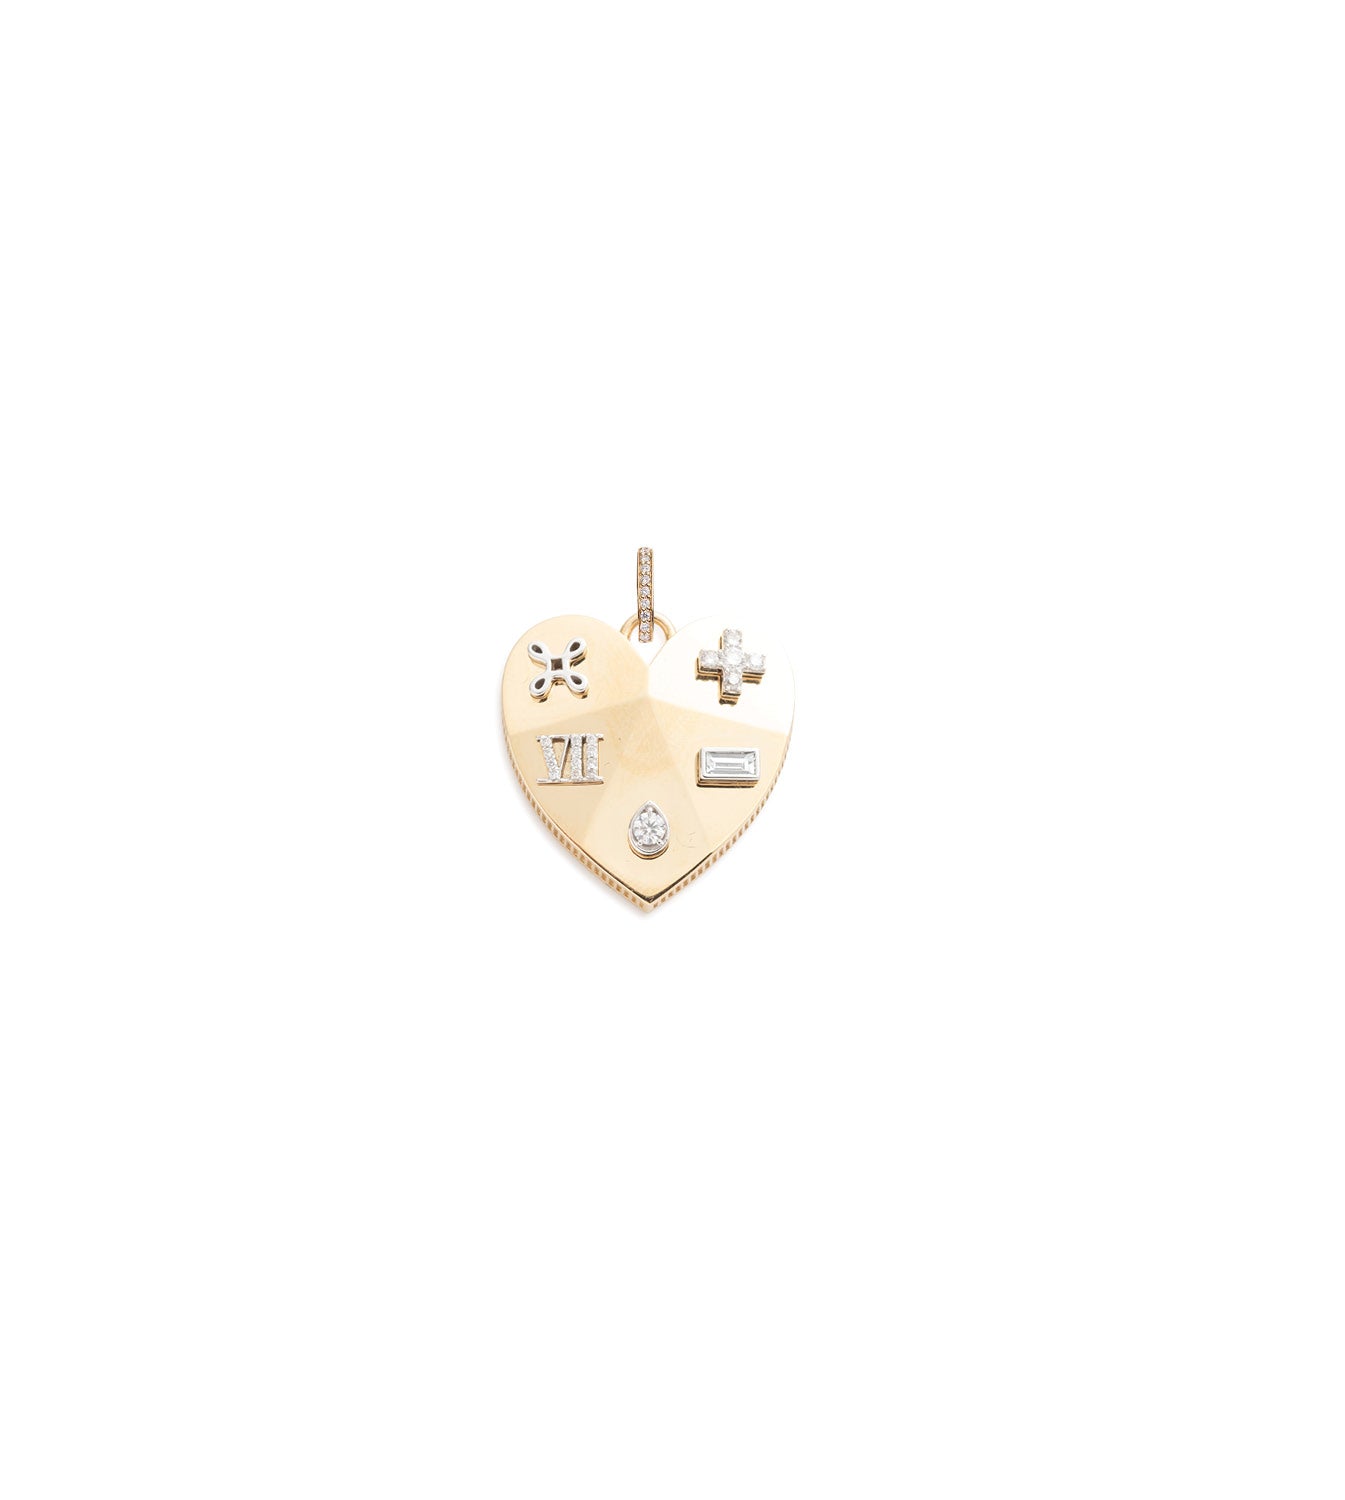 Ever Growing - True Love : Facets of Love Heart Pendant with Oval Pushgate